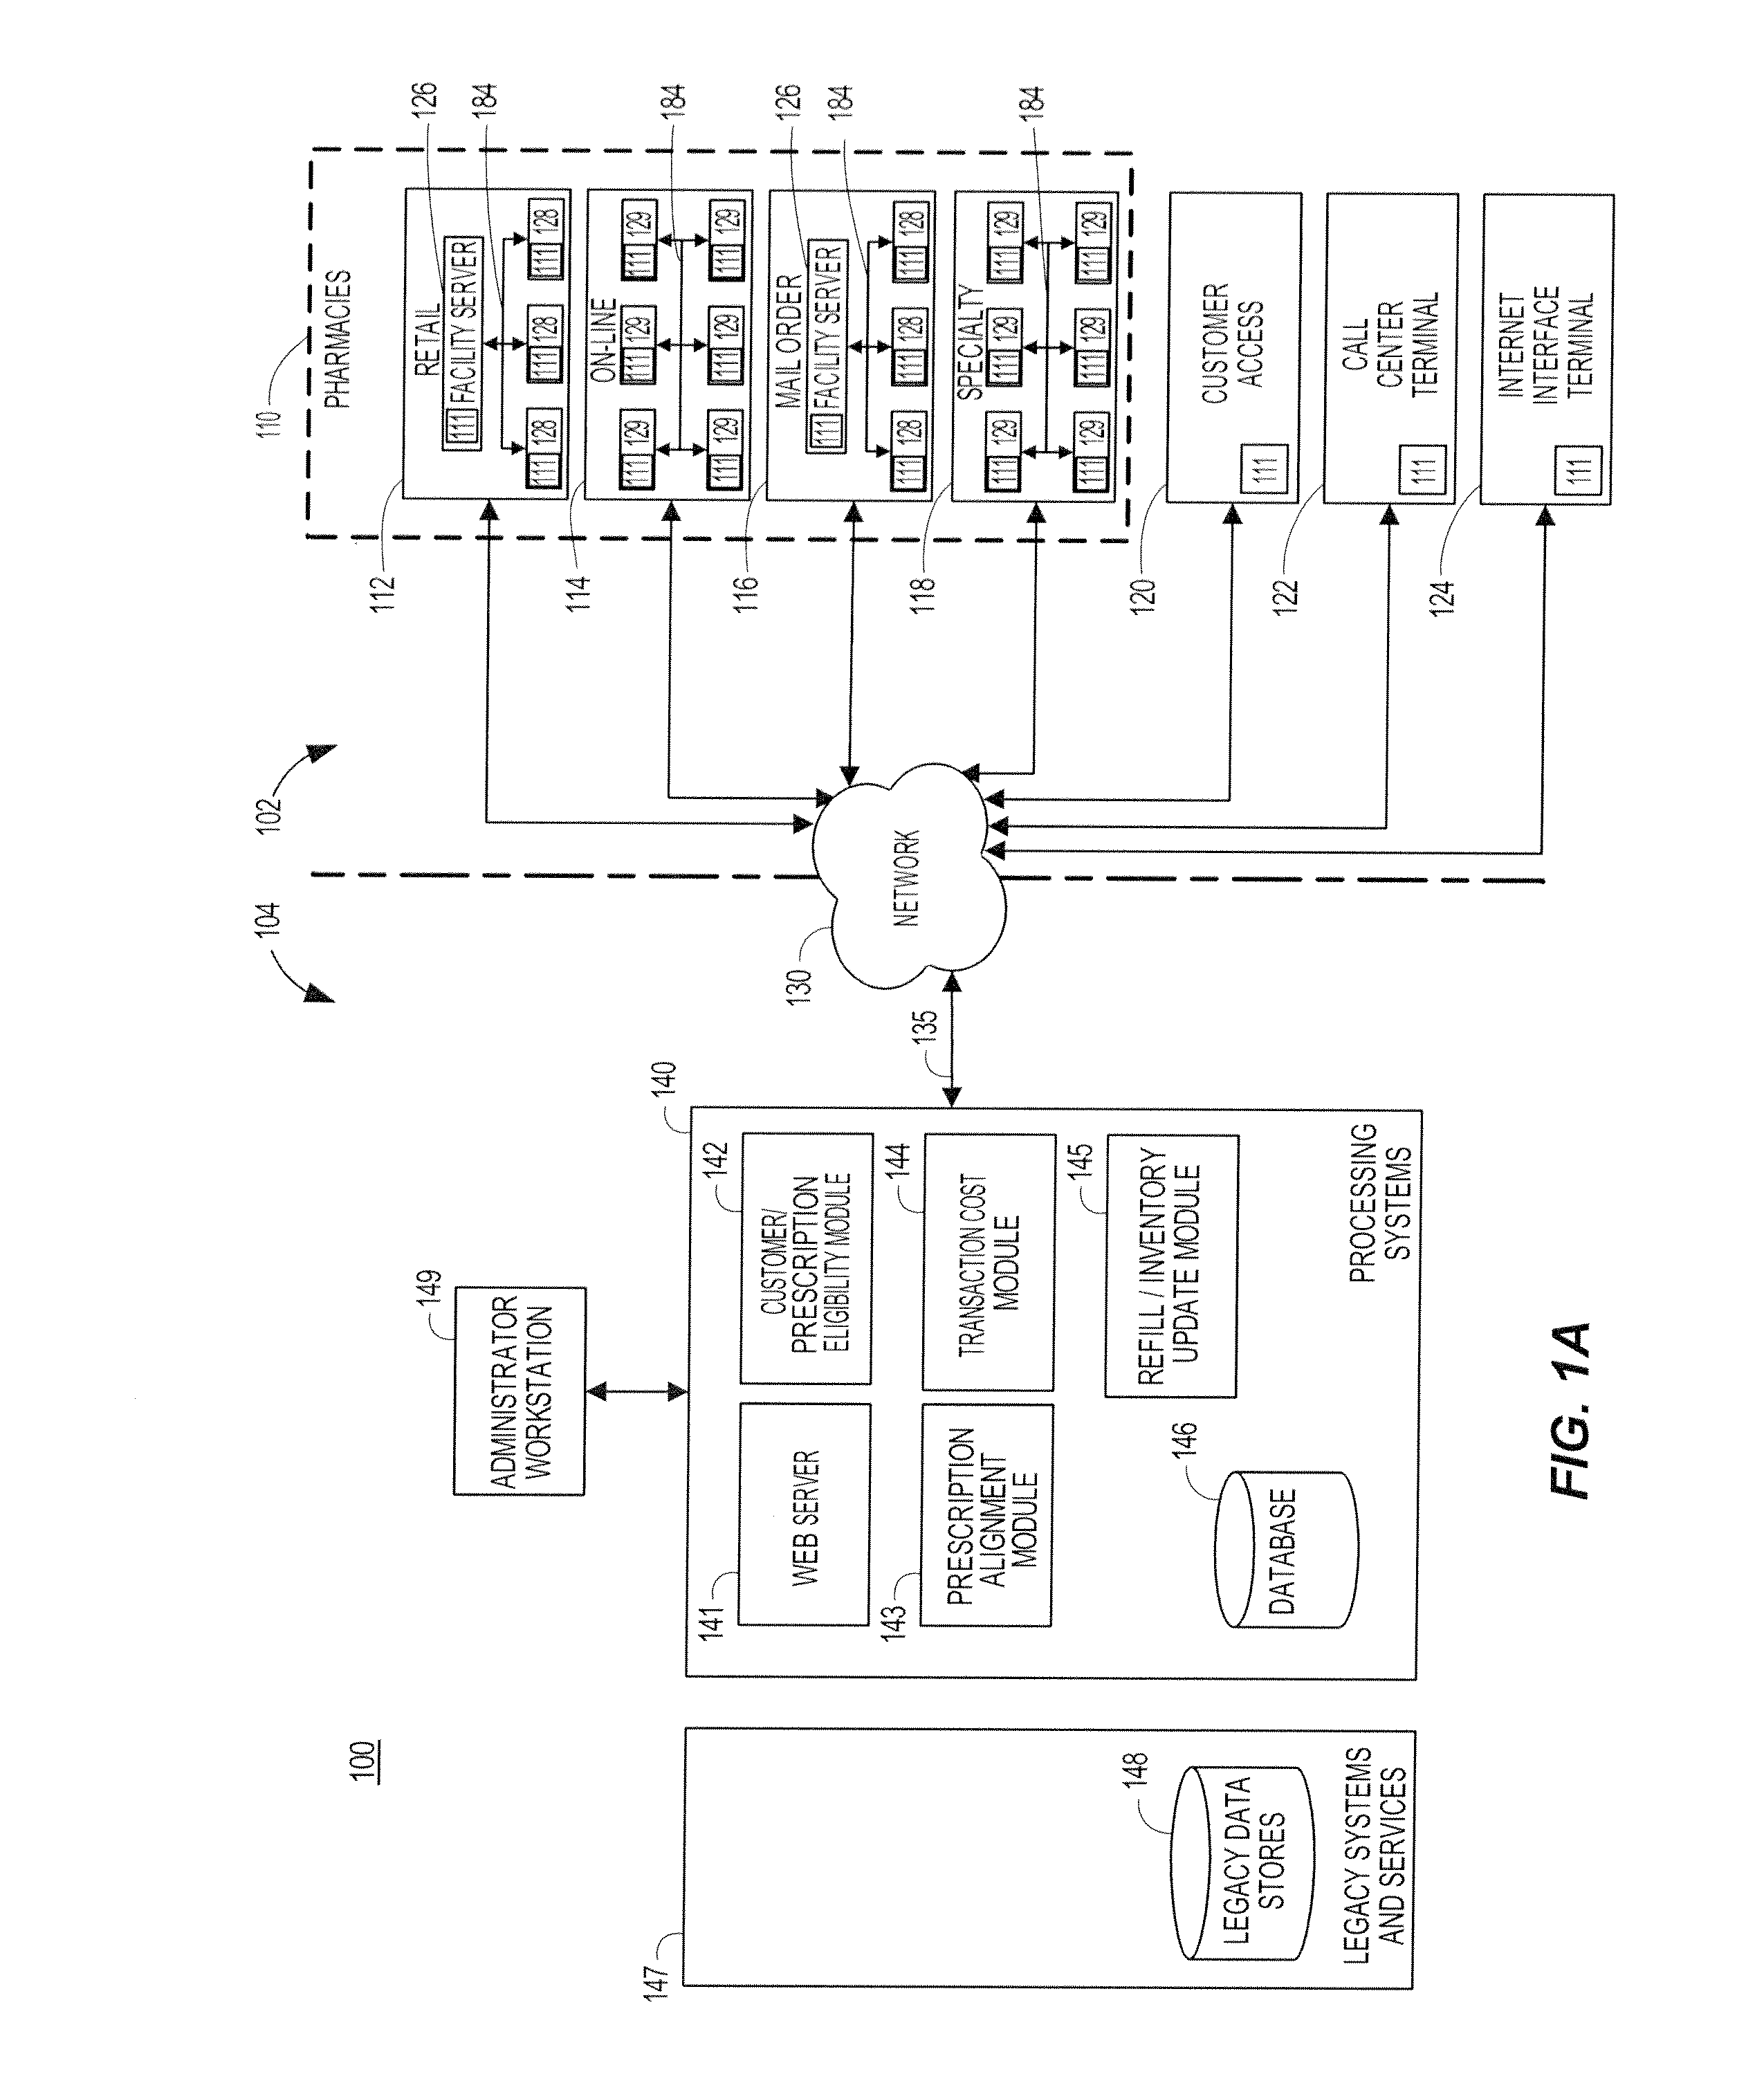 System and method for facilitating patient compliance with prescription medication regimen